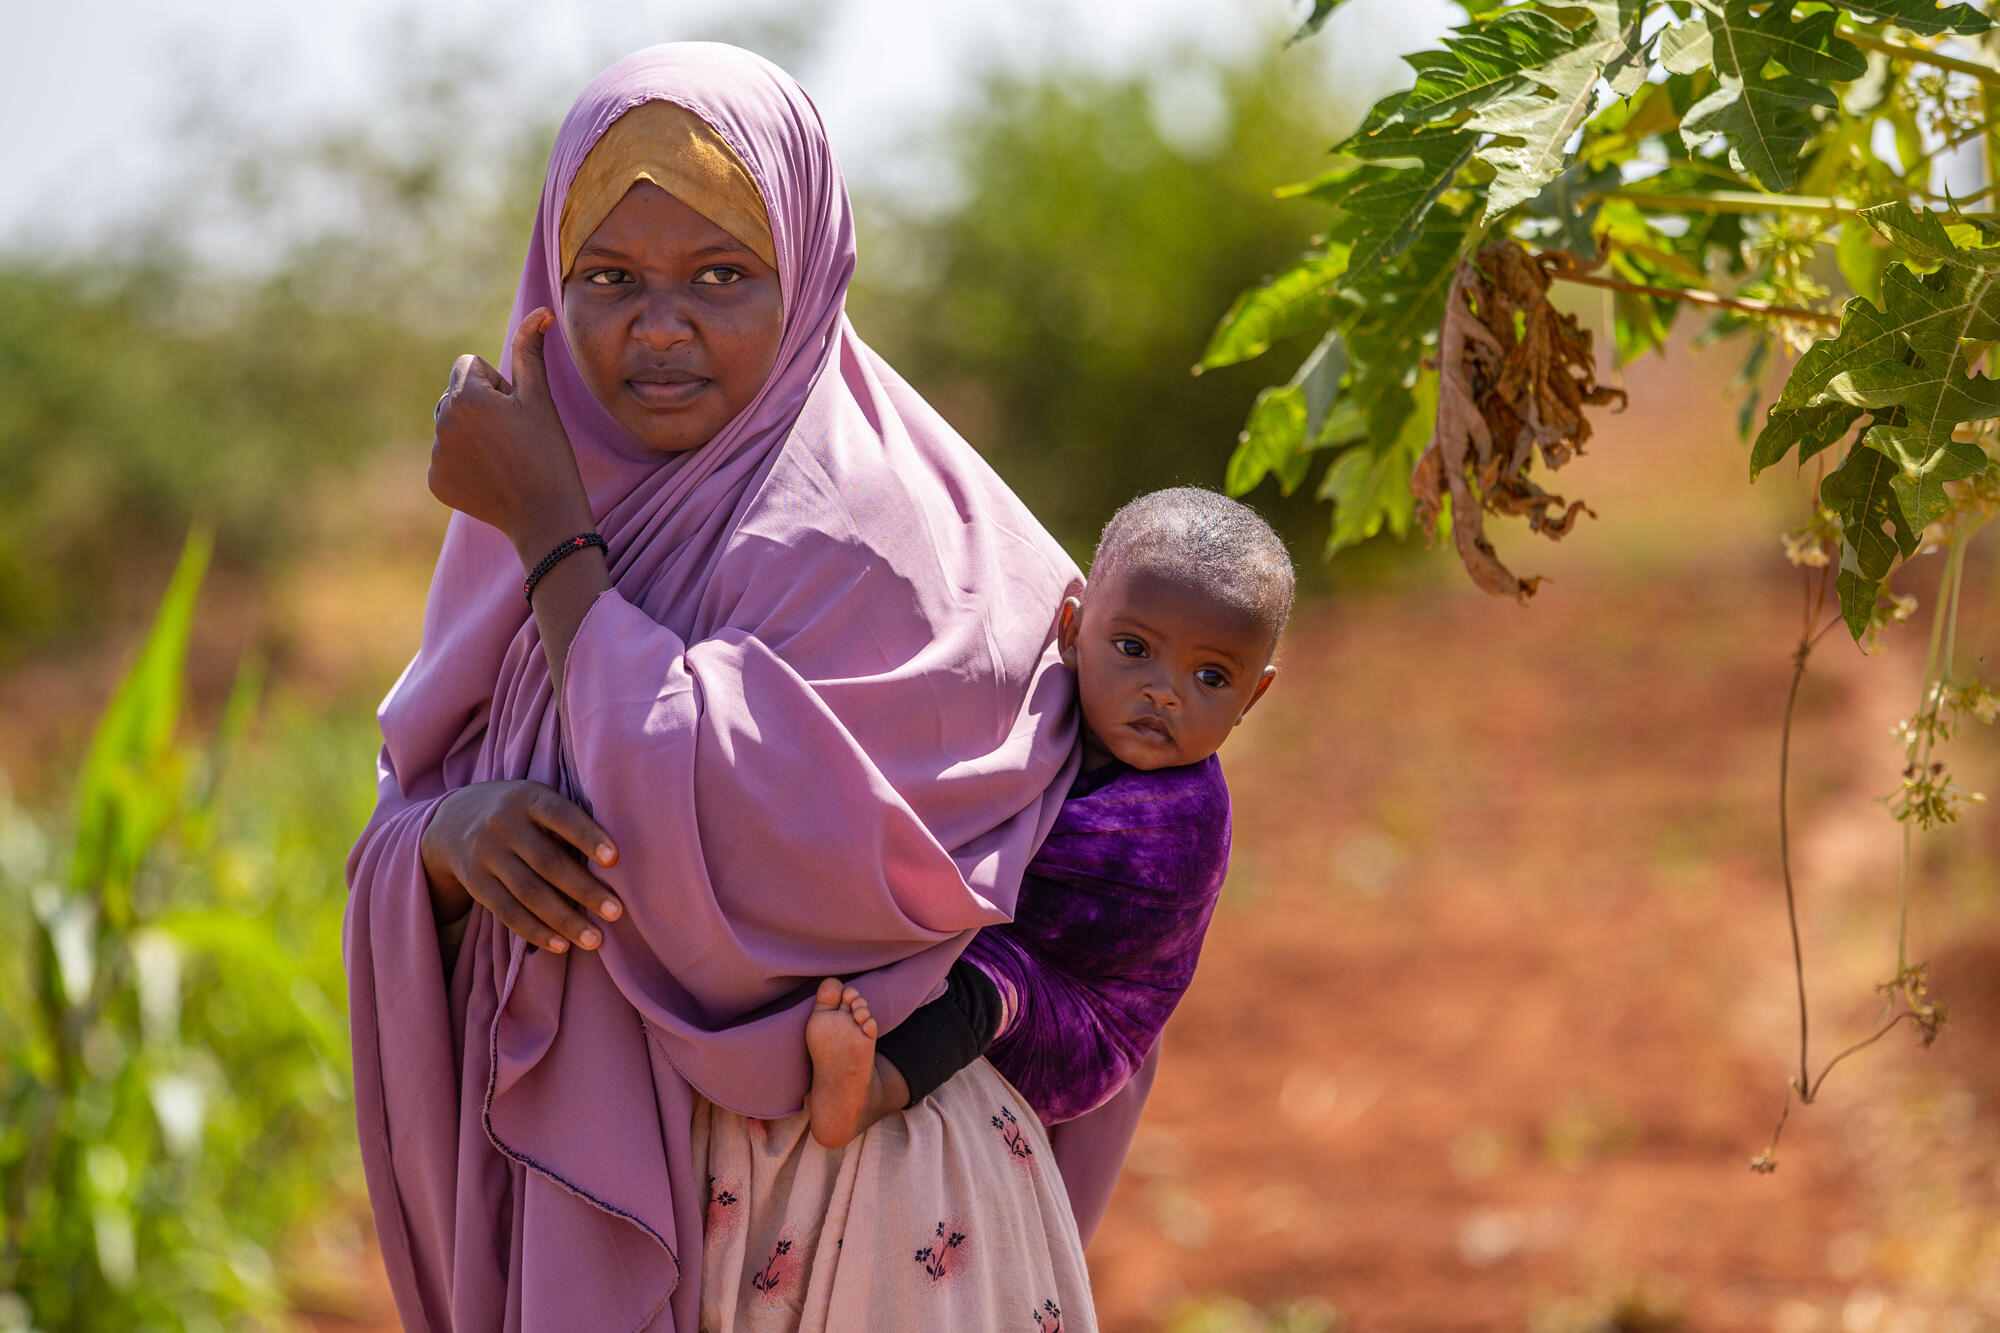 In Doolow, Somalia, a woman carries her child on her back. The World Vision's Kabasa Farm provides long-term solutions to hunger and malnutrition. It is now the source of livelihood for many households who moved to Doolow during the 2011 drought in search of aid and ended up being farmers.